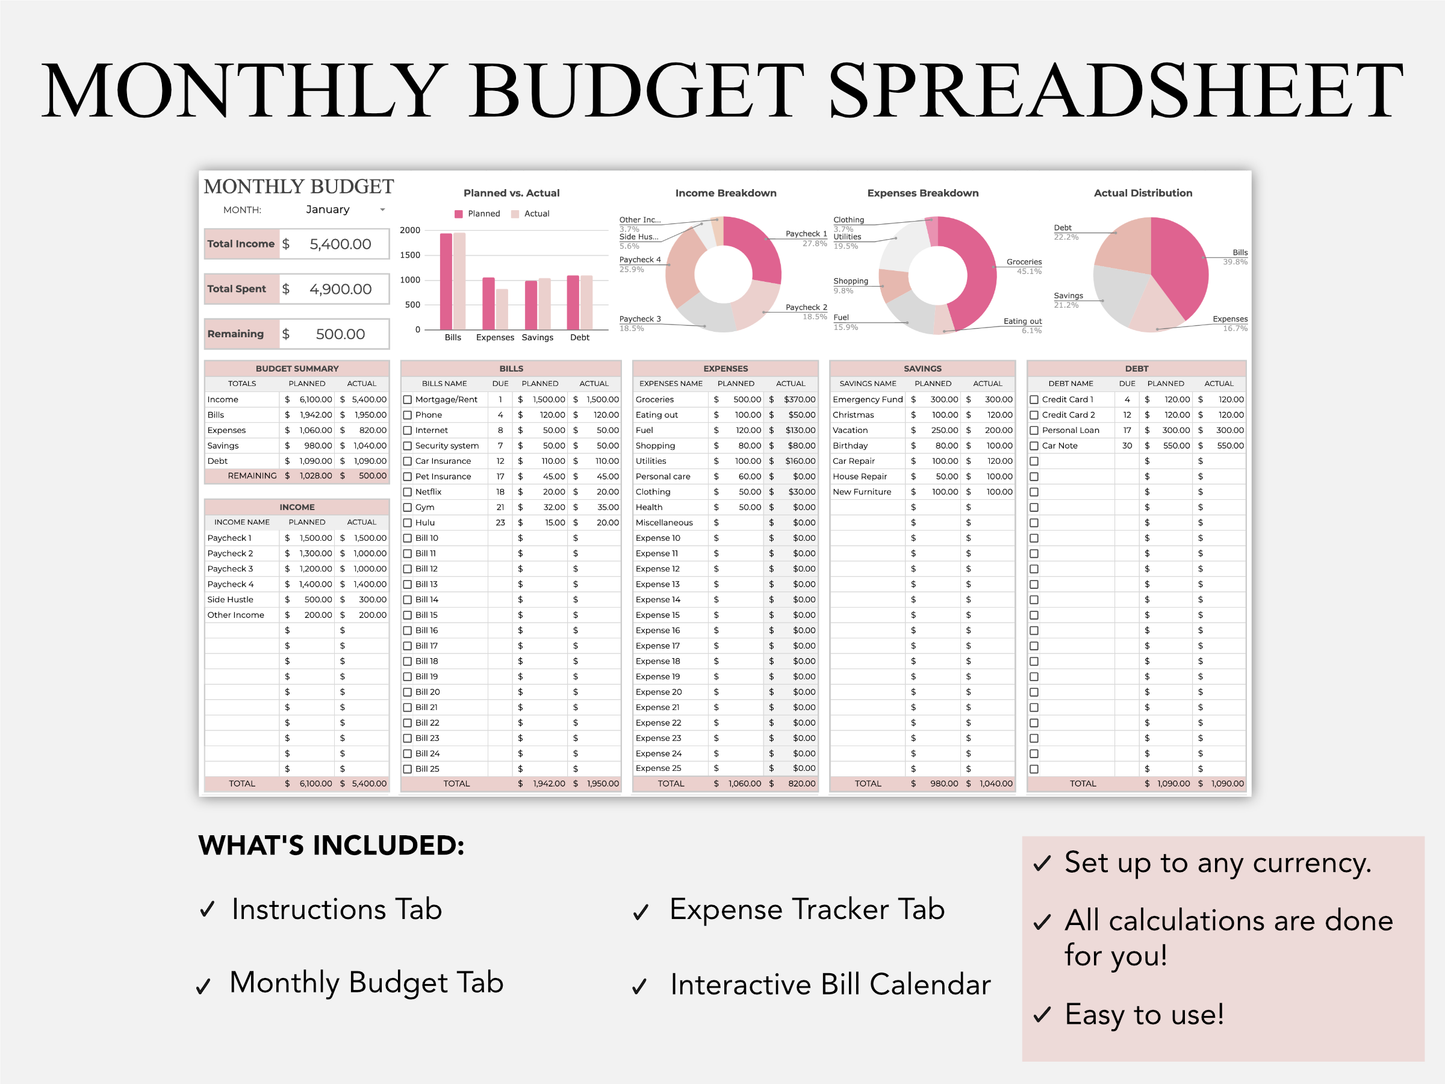 Monthly Budget Template - Easy to Use Spreadsheet Template